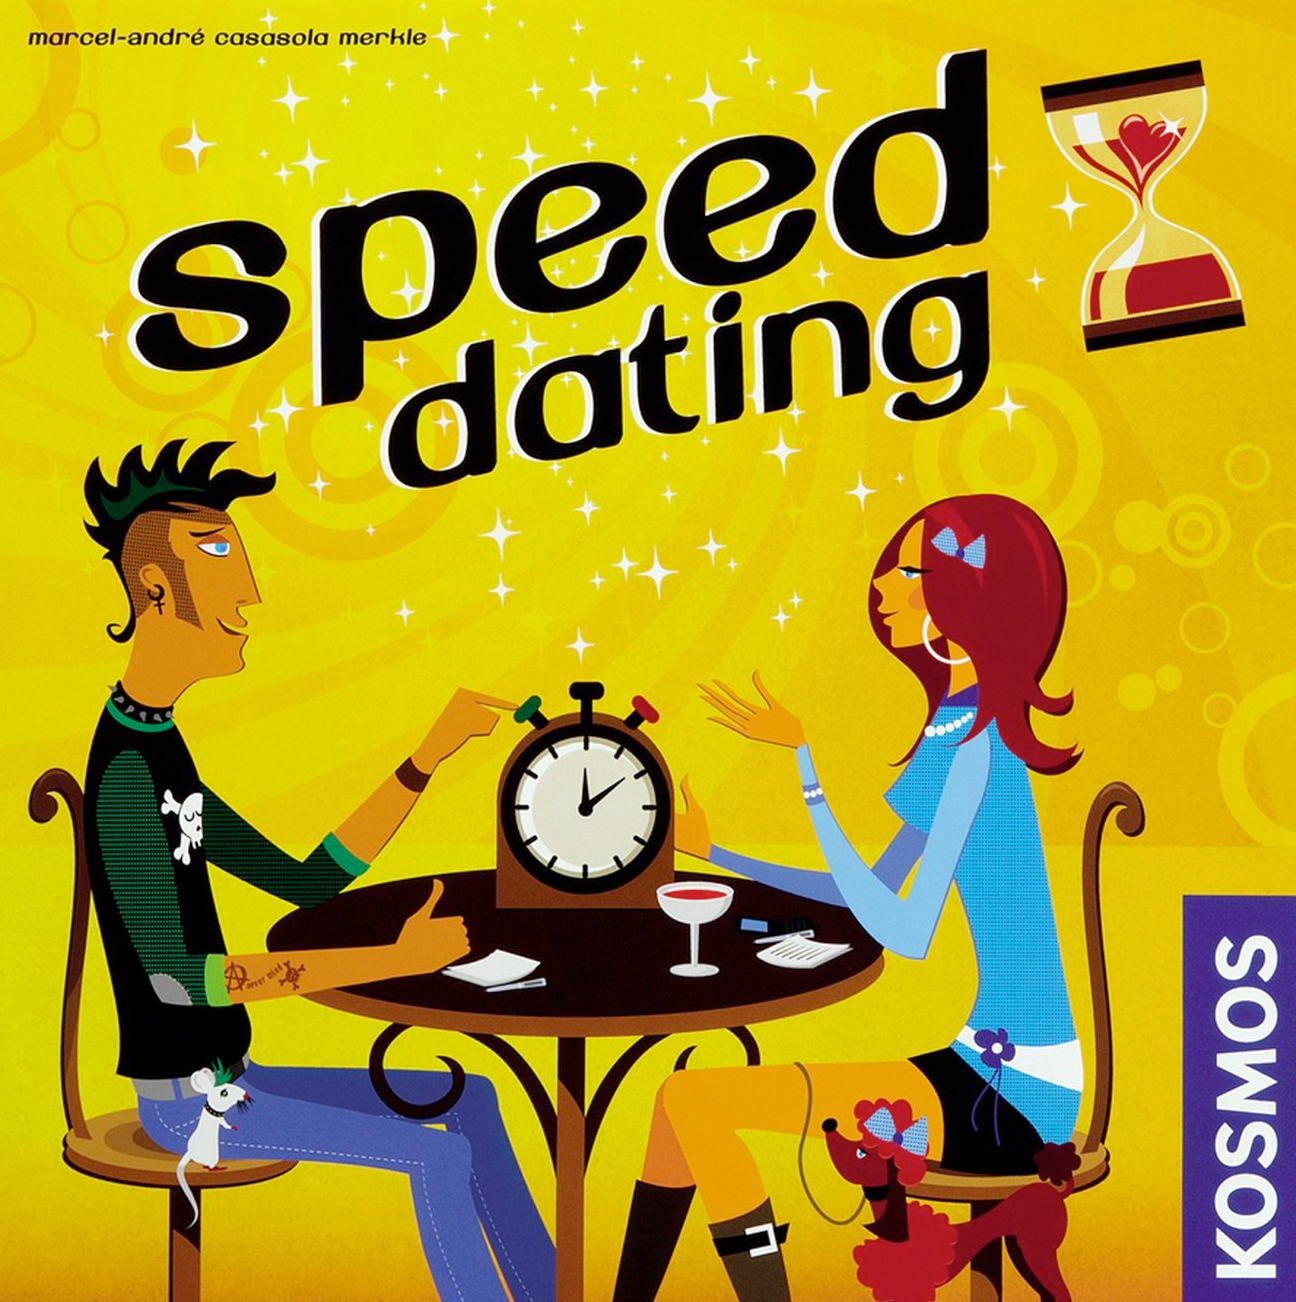 Speed ​​dating chat seite